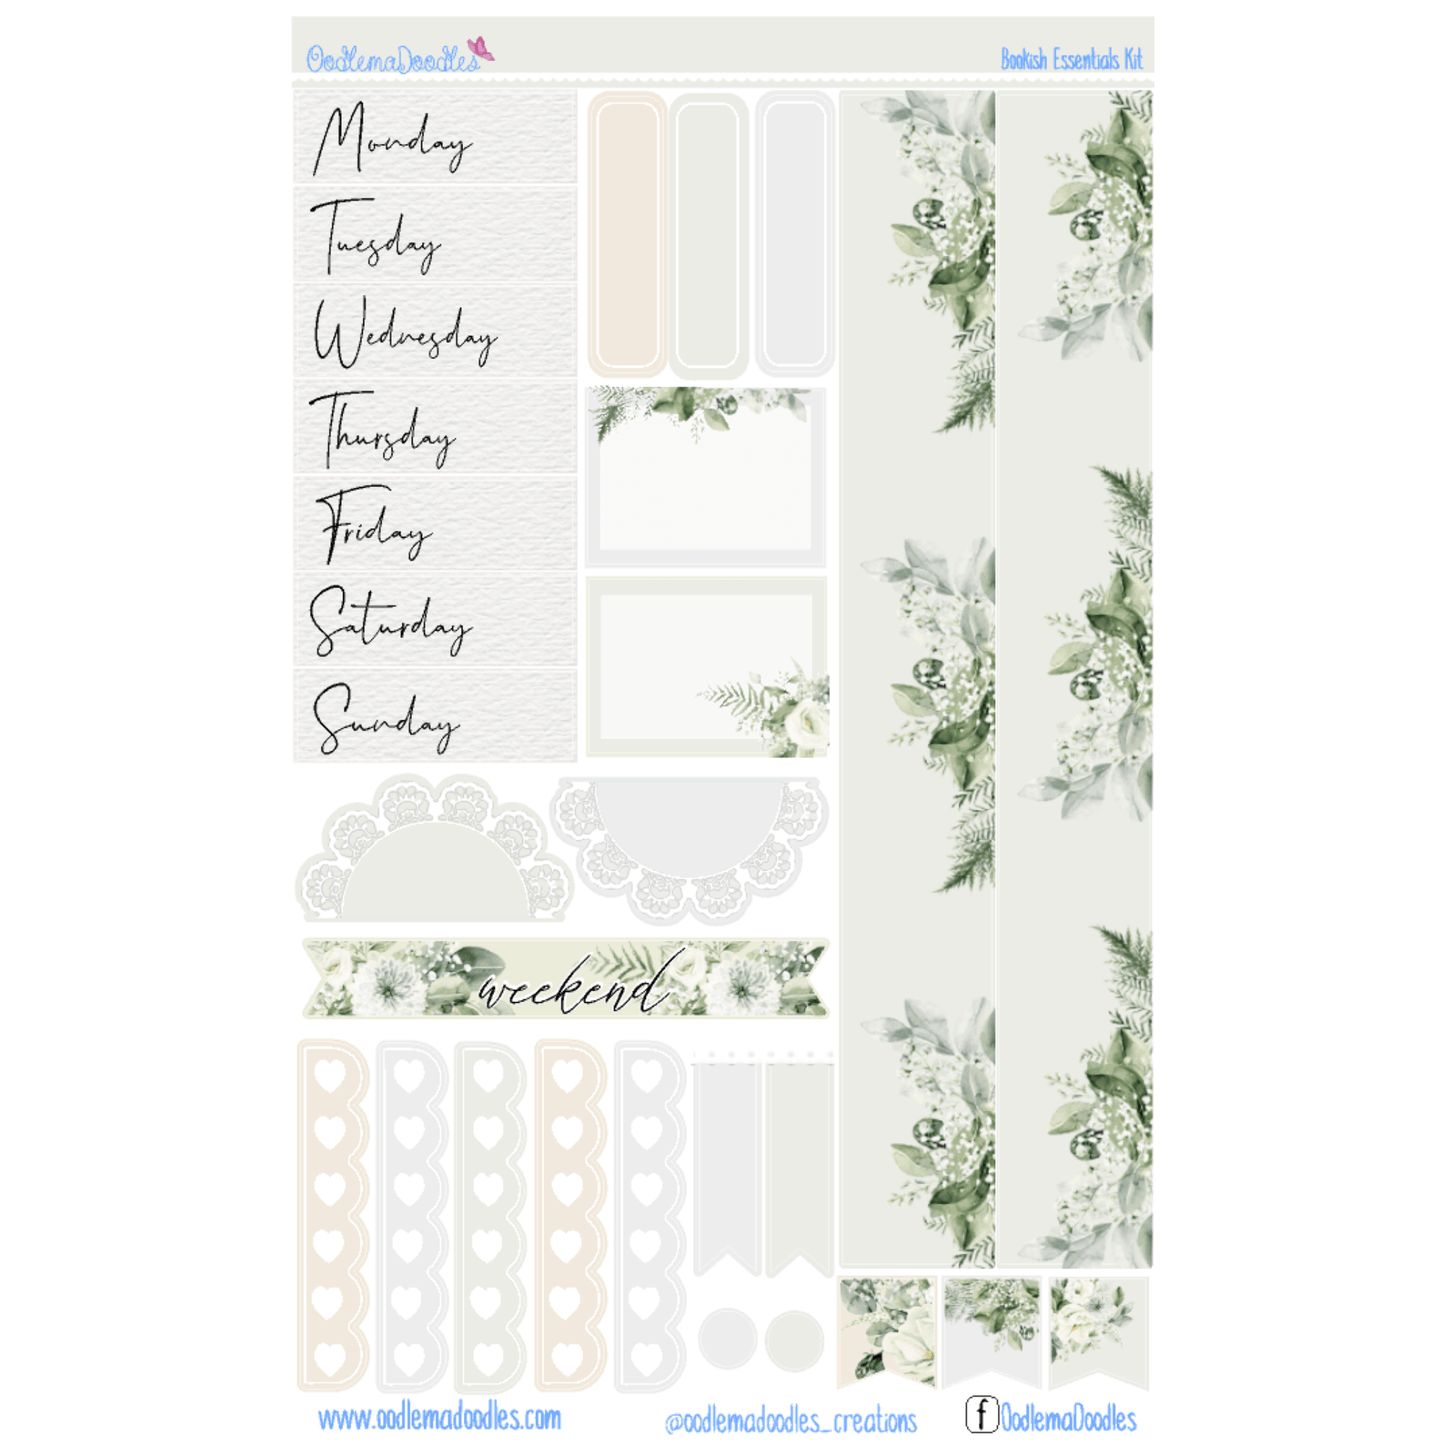 Bookish Essential Planner Sticker Kit - oodlemadoodles